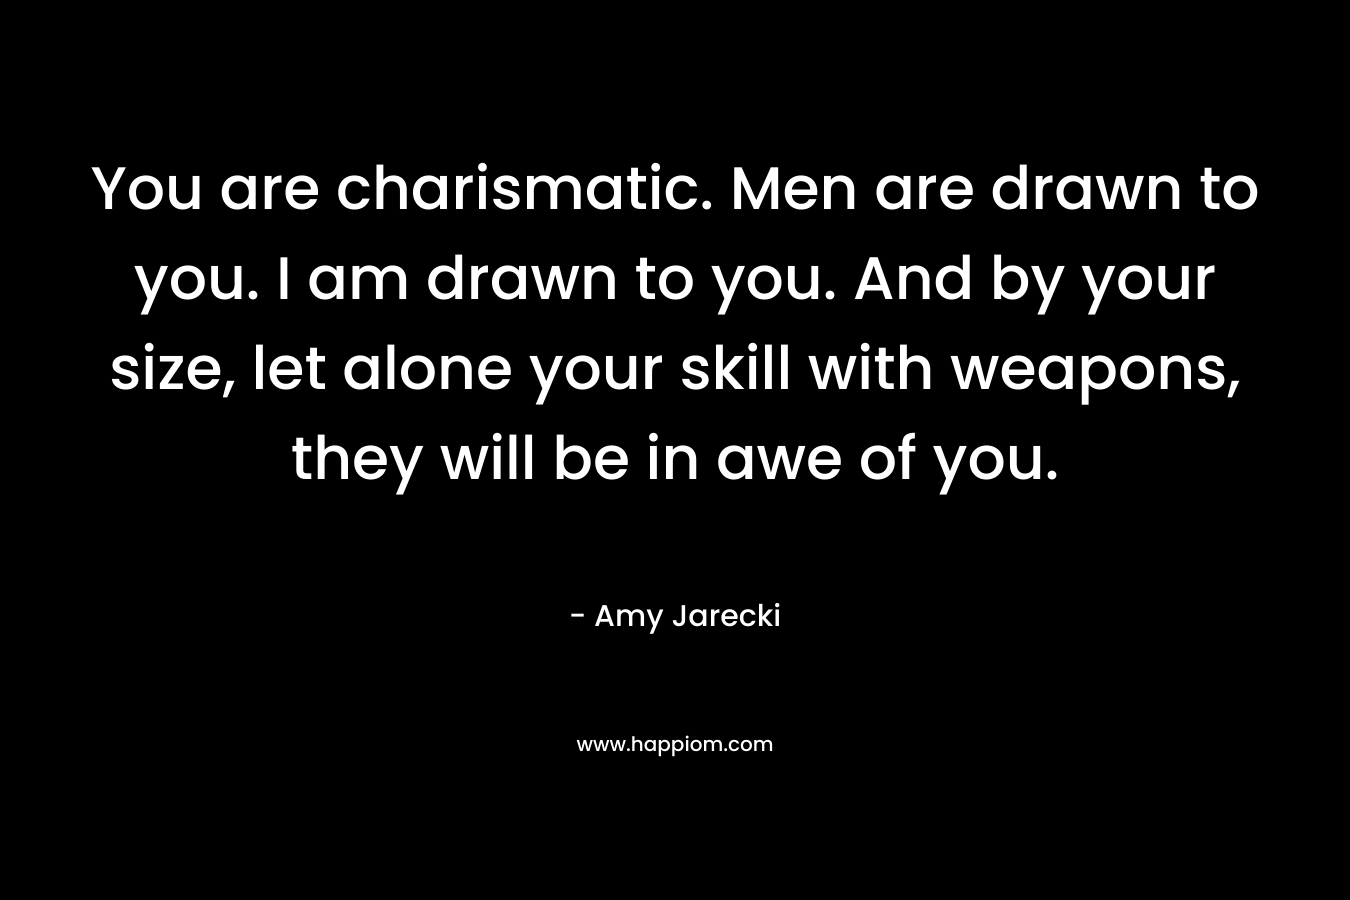 You are charismatic. Men are drawn to you. I am drawn to you. And by your size, let alone your skill with weapons, they will be in awe of you. – Amy Jarecki